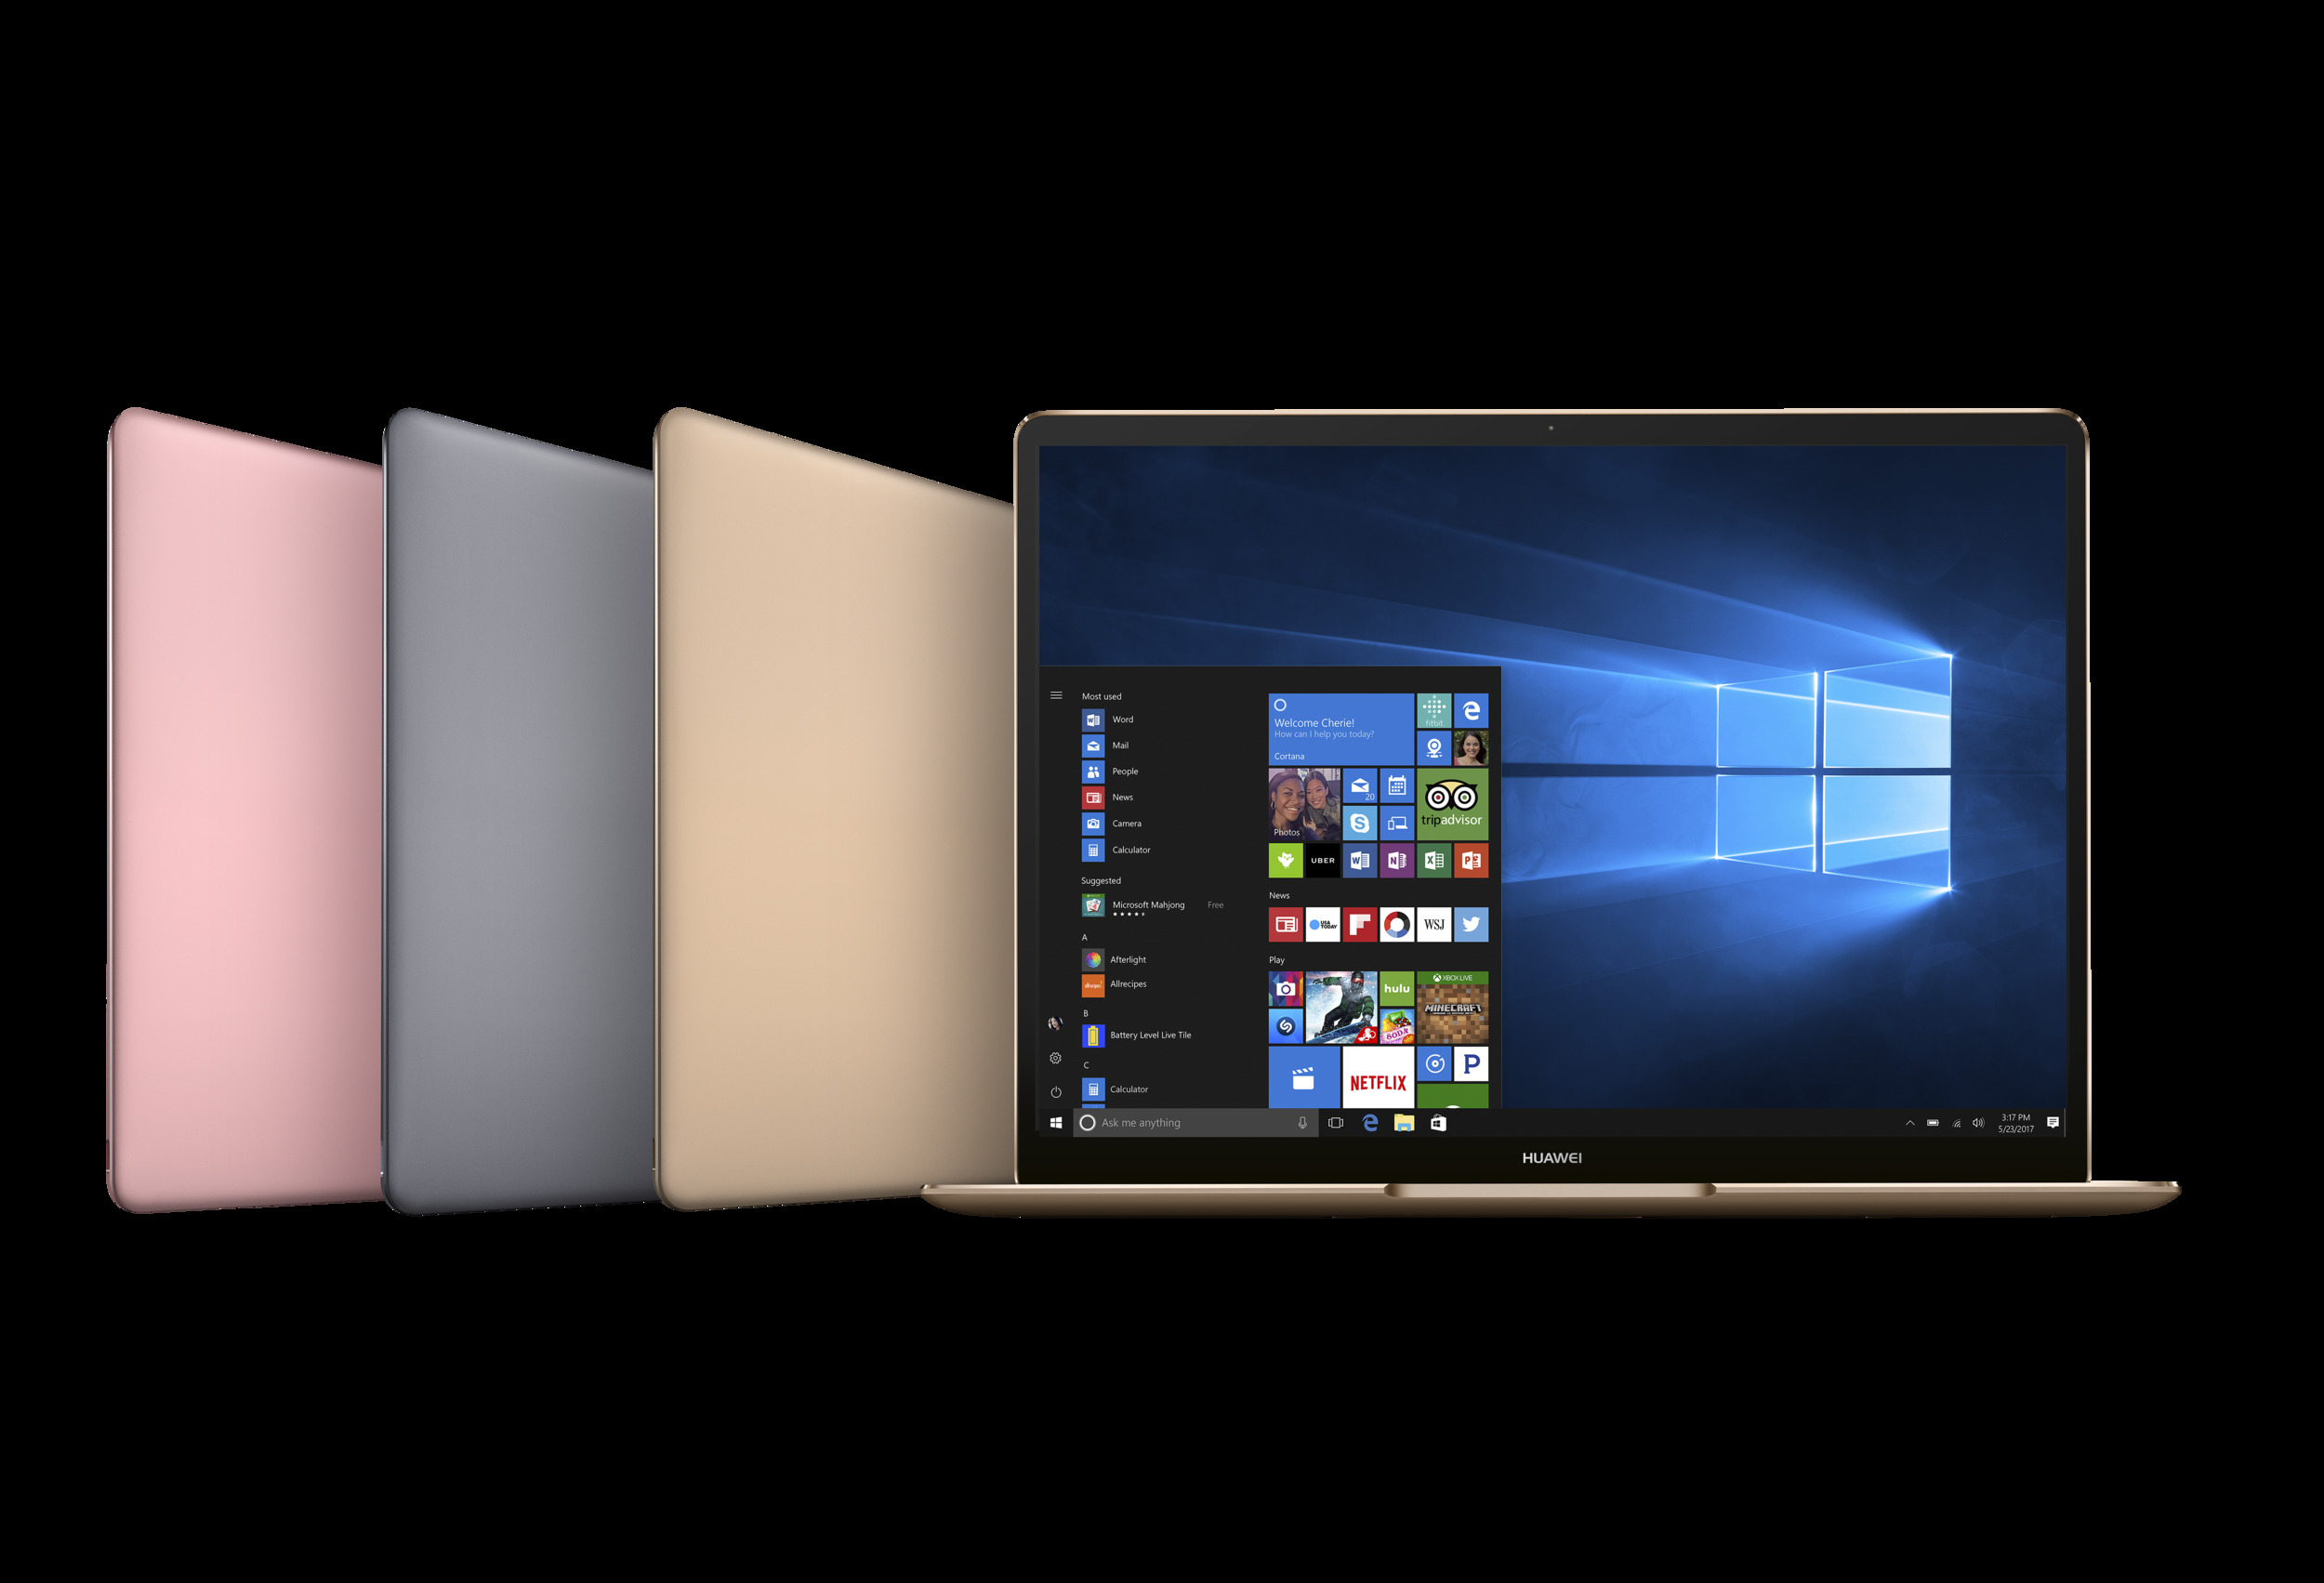 By Rethinking One Button Huawei MateBook Disrupts the Entire Laptop Market